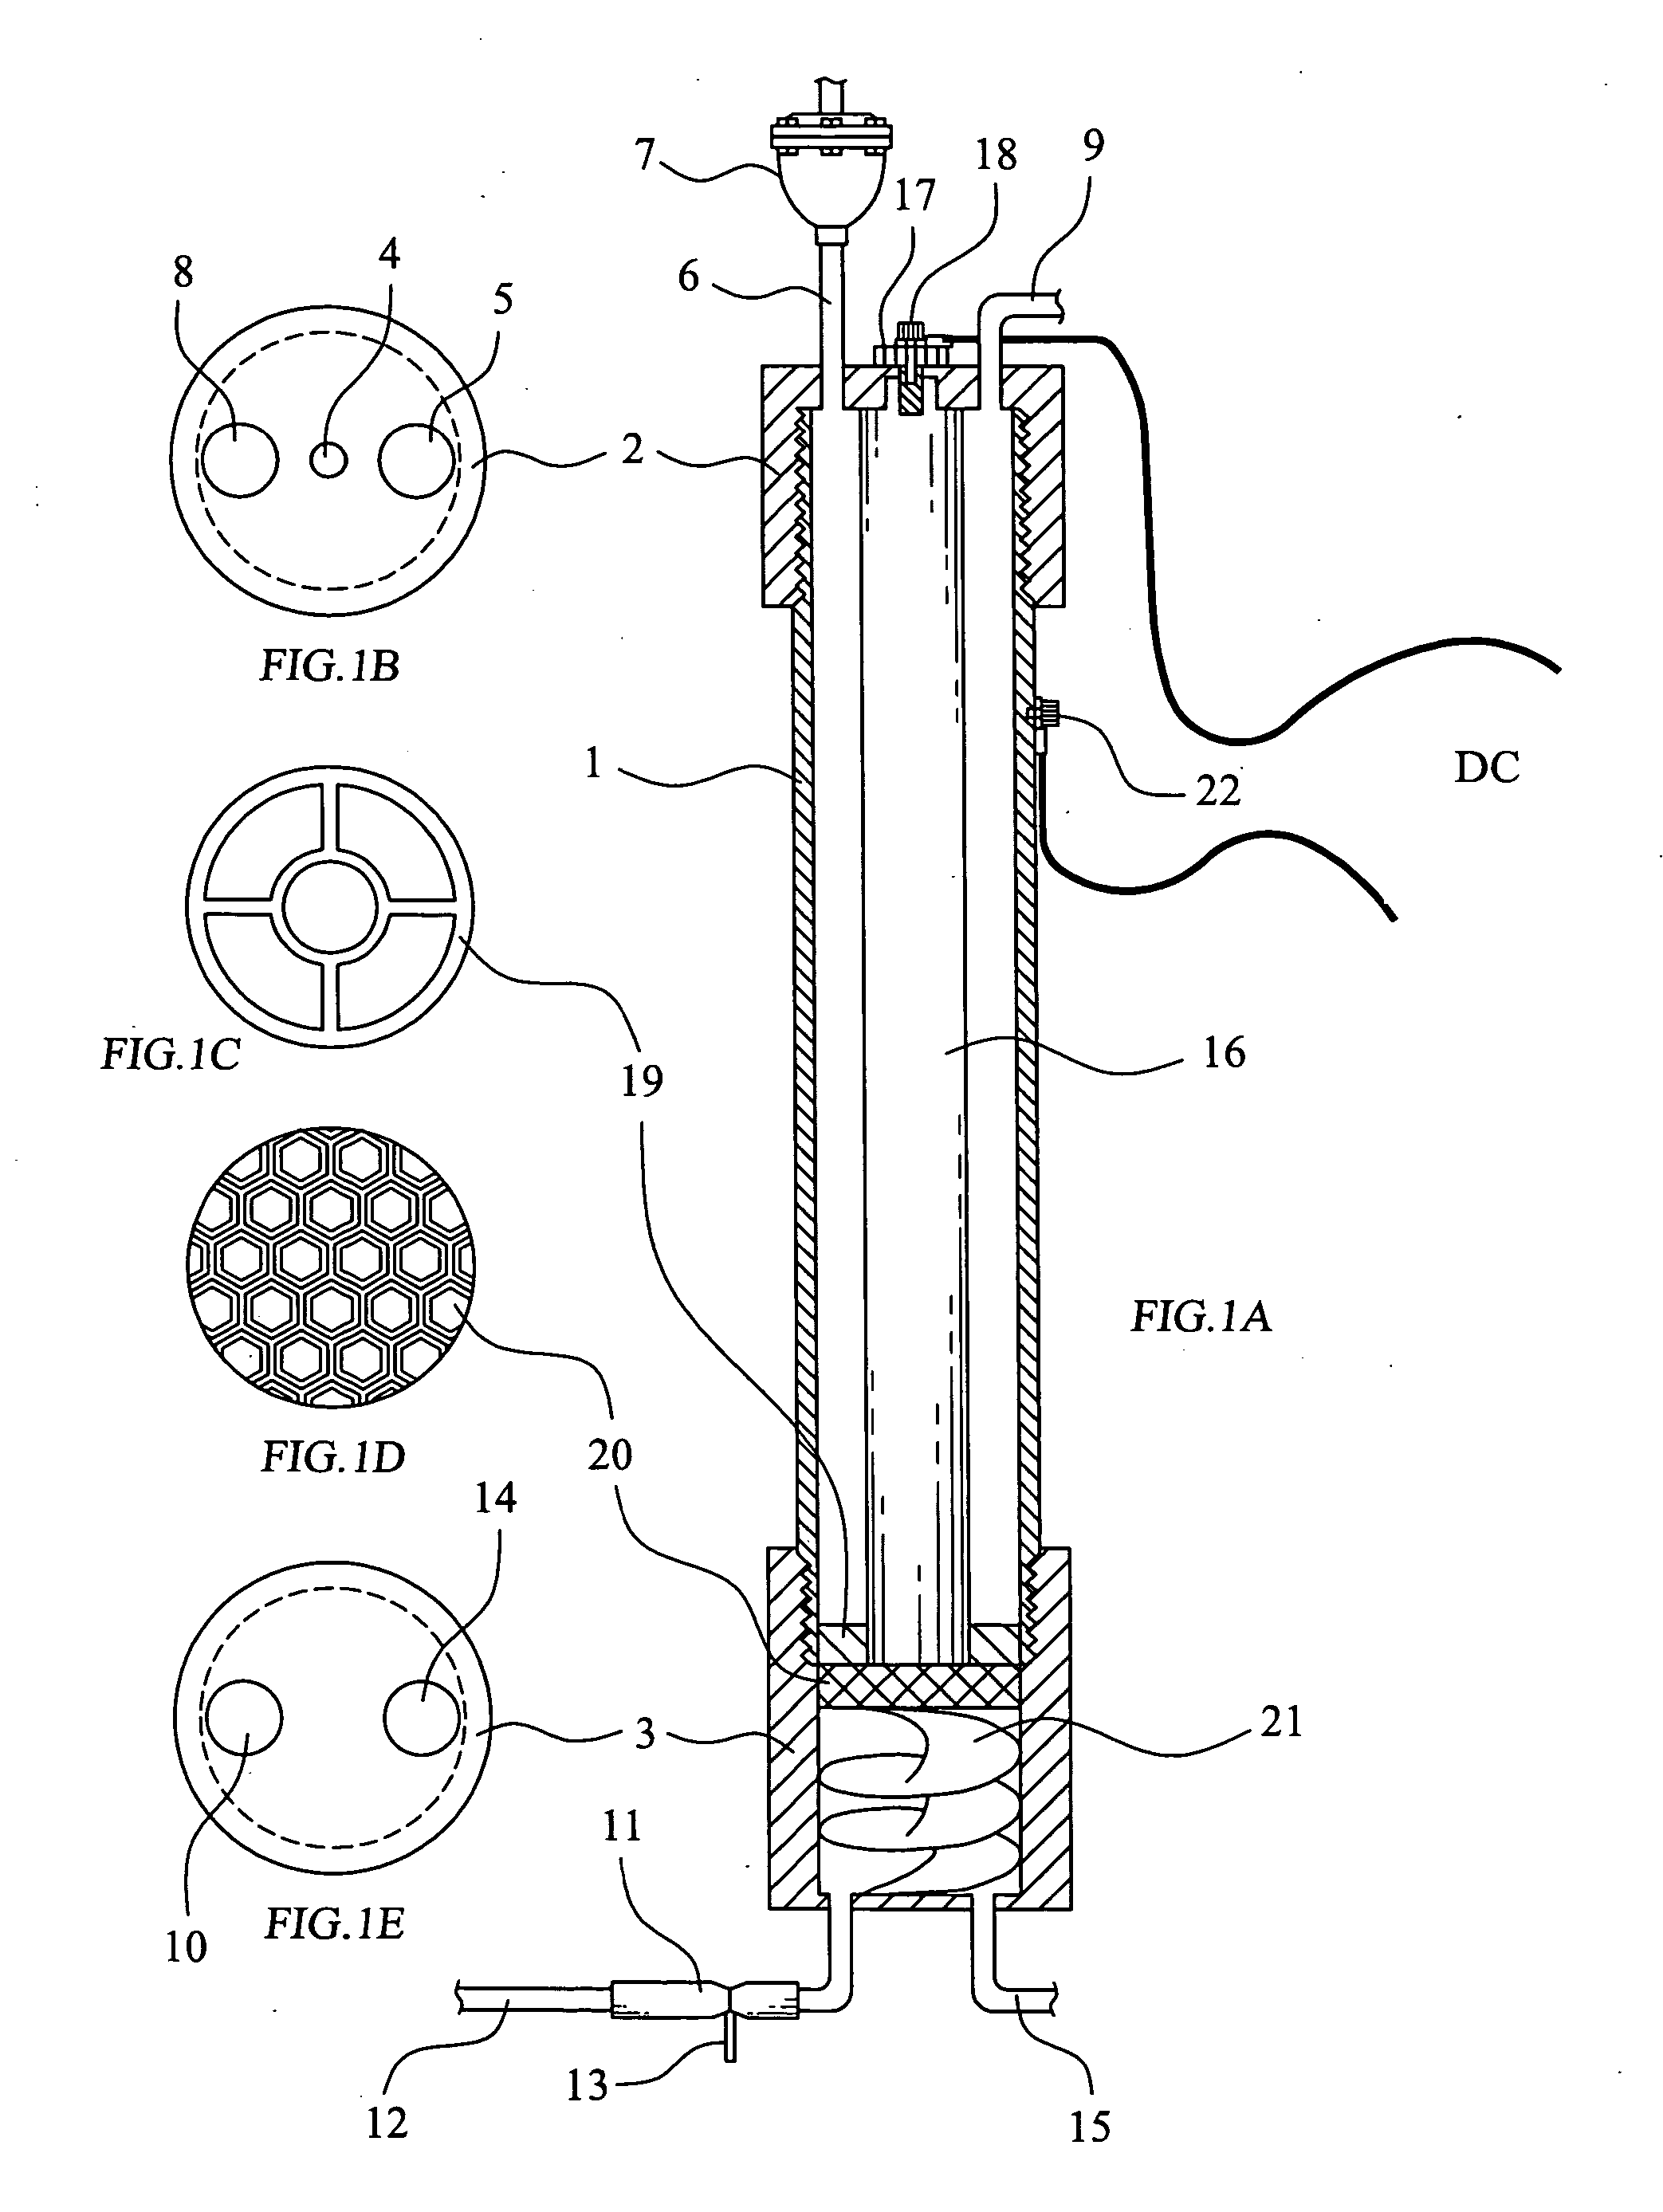 Water treatment reactor for simultaneous electrocoagulation and advanced oxidation processes